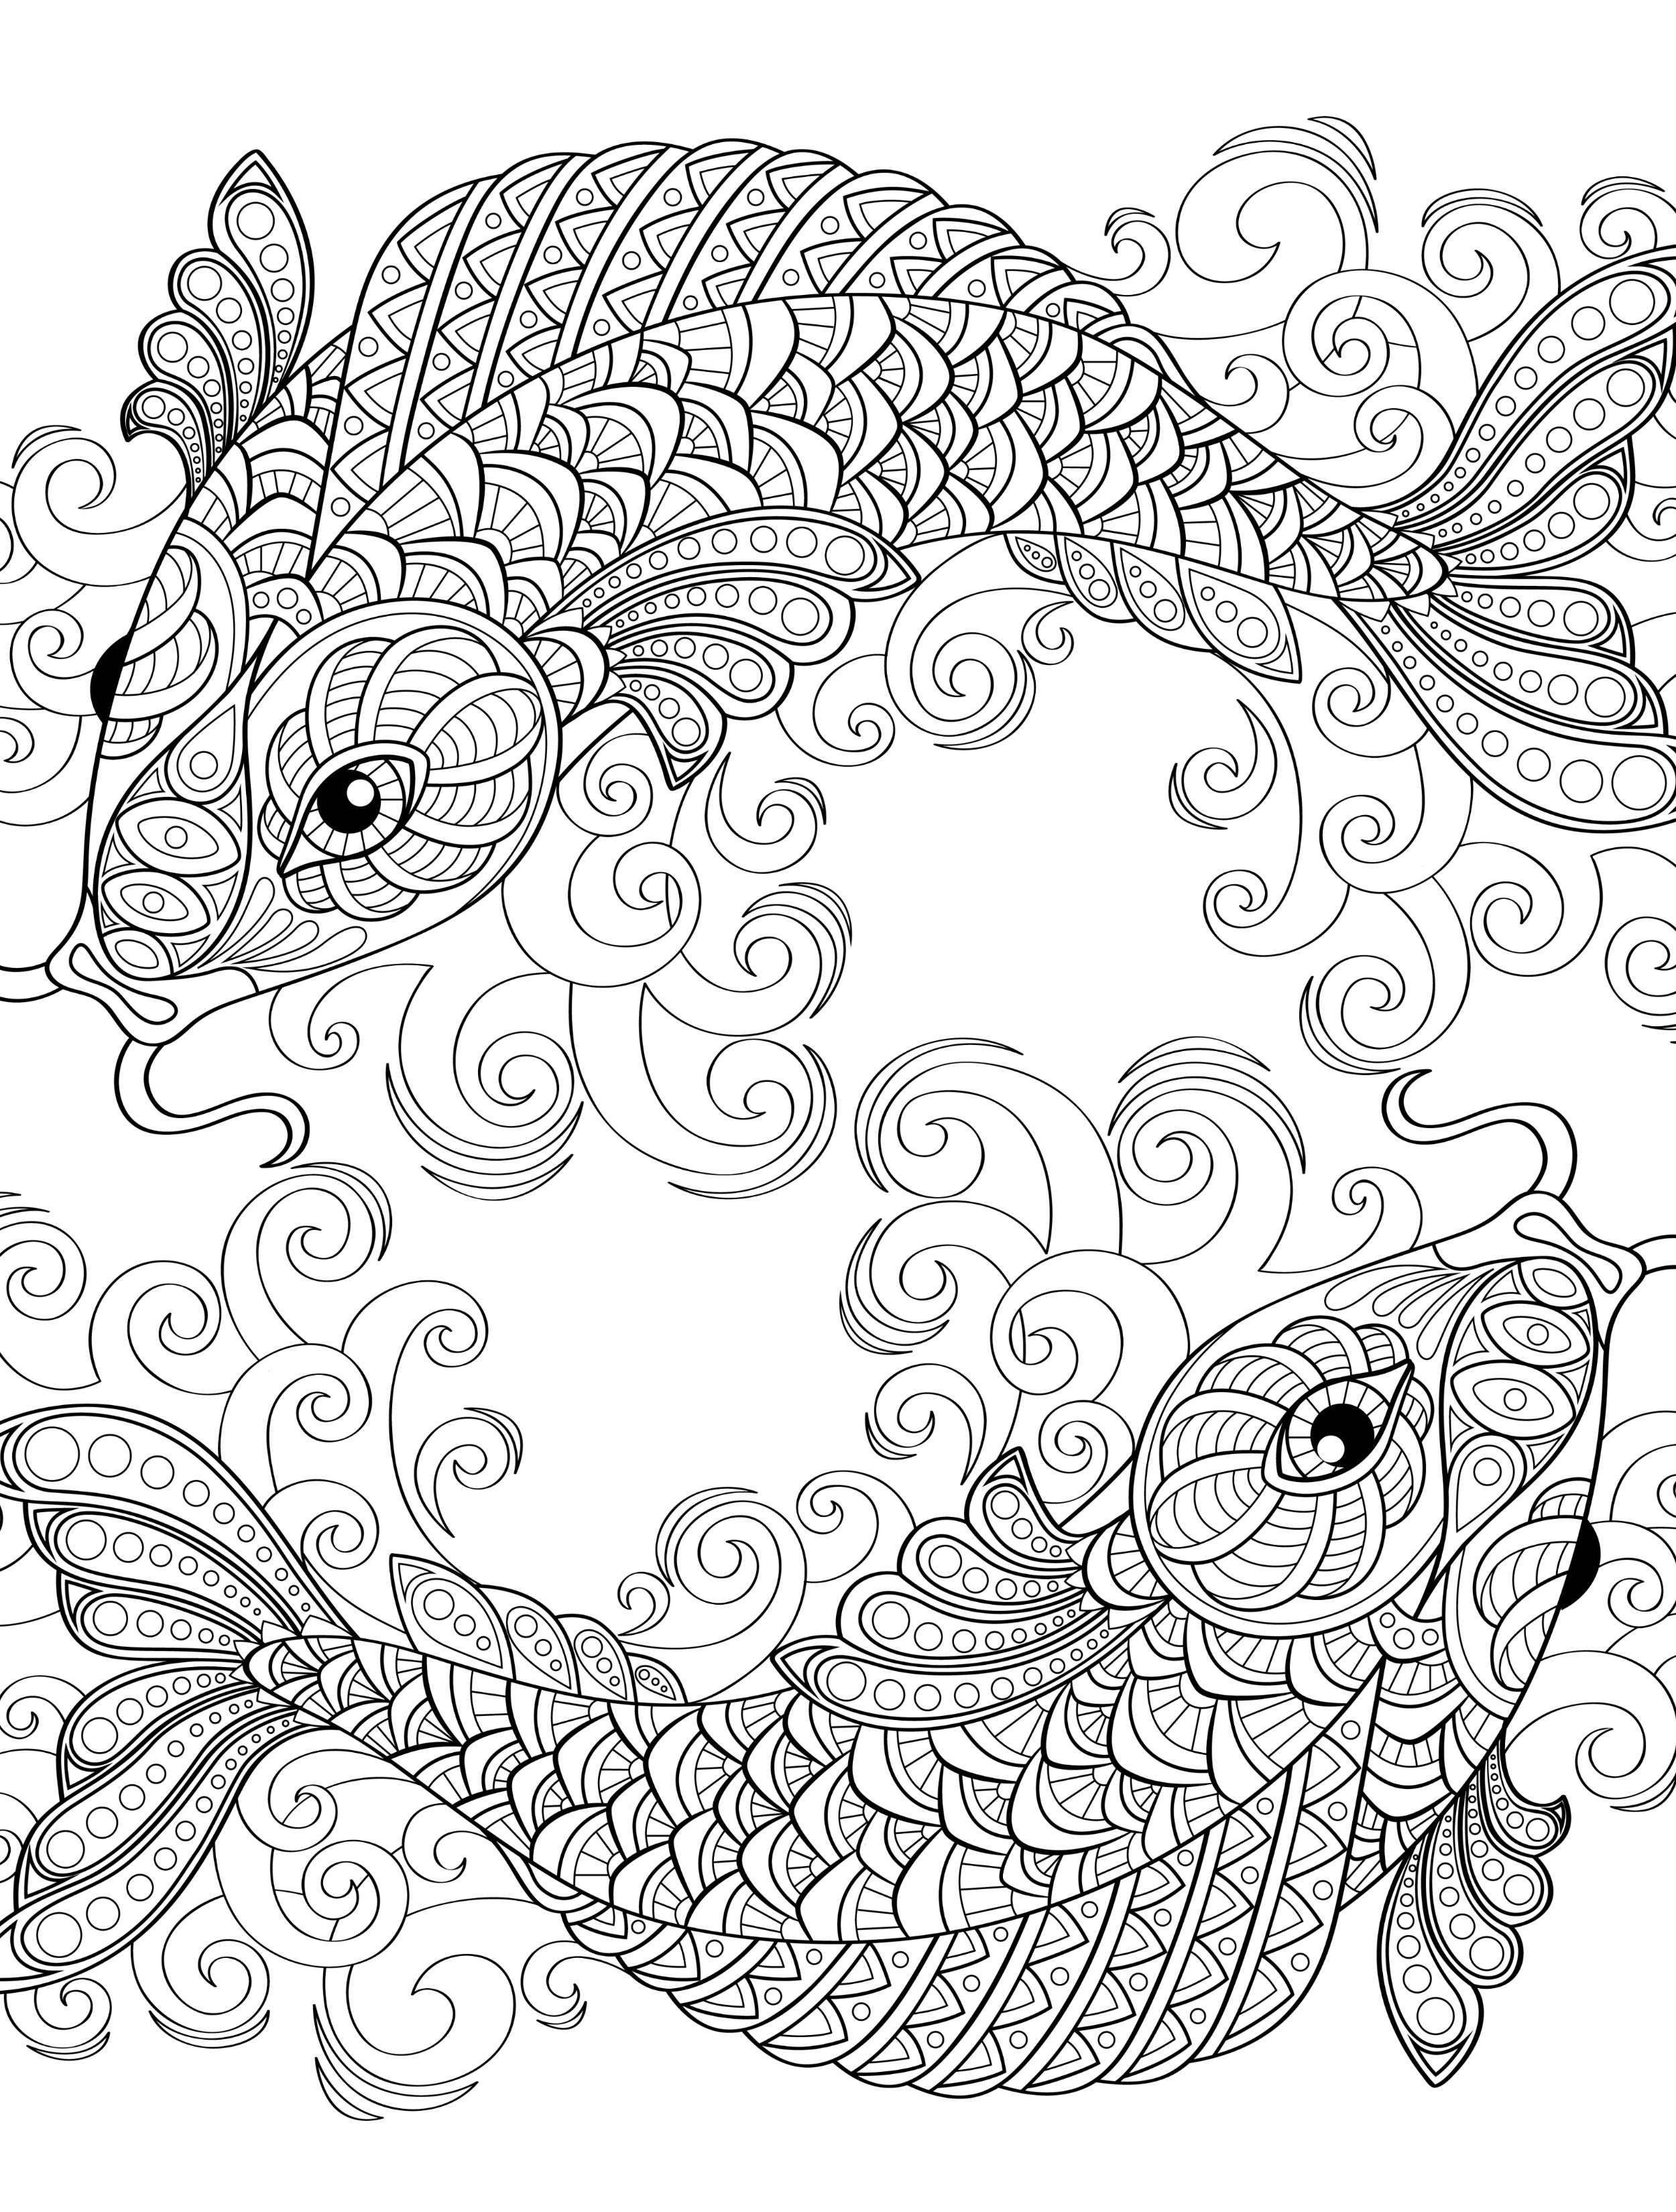 adult coloring pages free 25 bästa idéerna om adult coloring pages på pinterest adult pages free coloring 